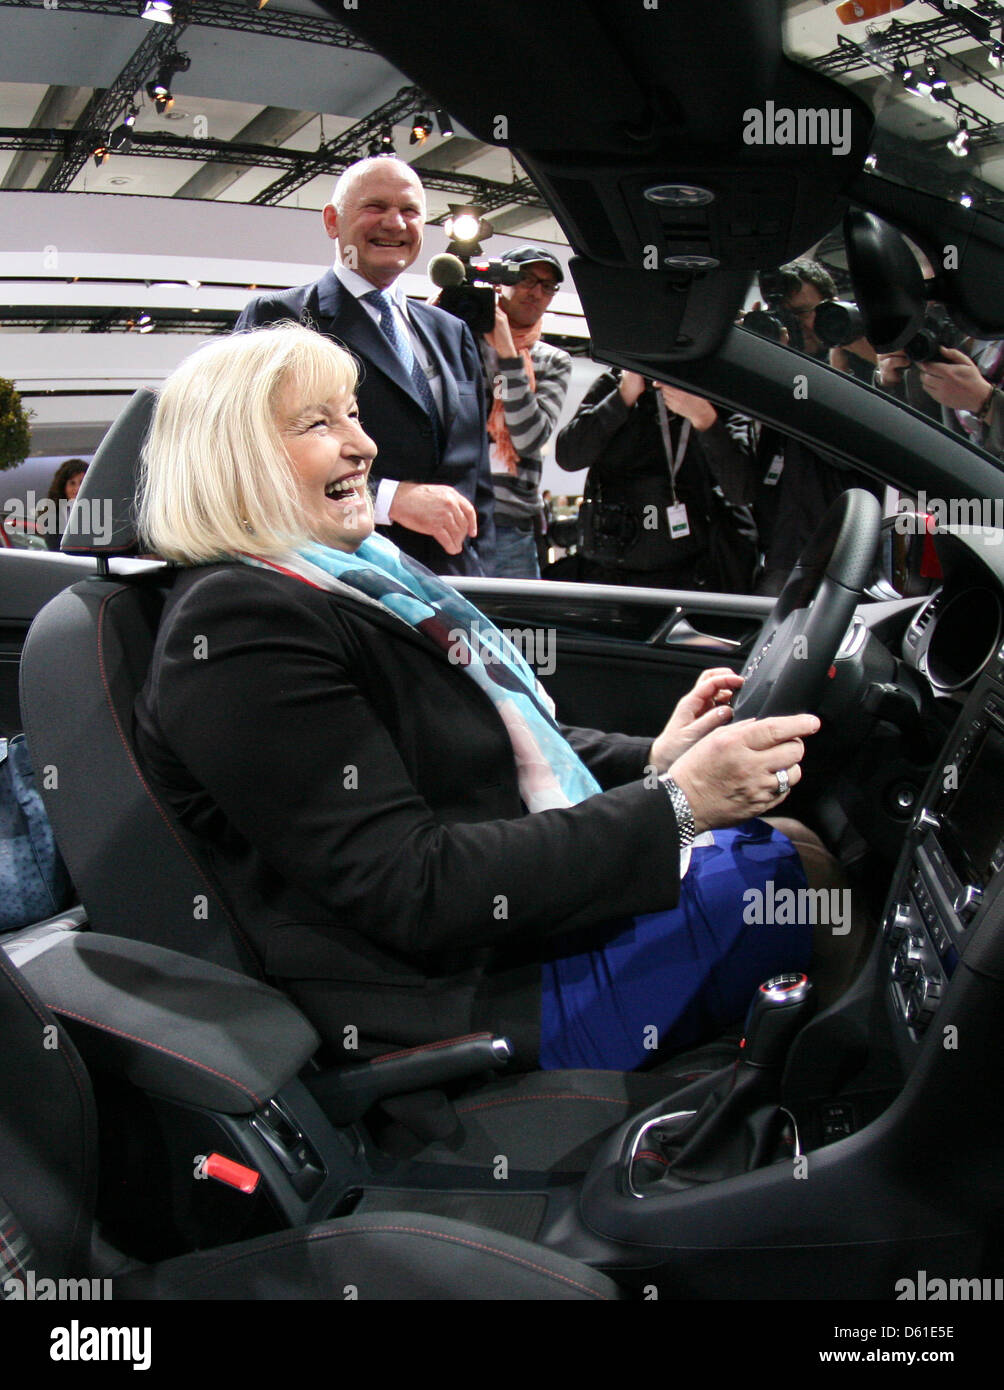 Chairman of Volkswagen Supervisory Board Ferdinand Piech stands next to his wife Ursula sitting in a VW Golf convertible car prior to the general meeting of car manufacturer  Volkswagen in Hamburg, Germany, 19 April 2012. Ursula Piech will be elected to the supervisory board during the meeting. Photo: CHRISTIAN CHARISIUS Stock Photo